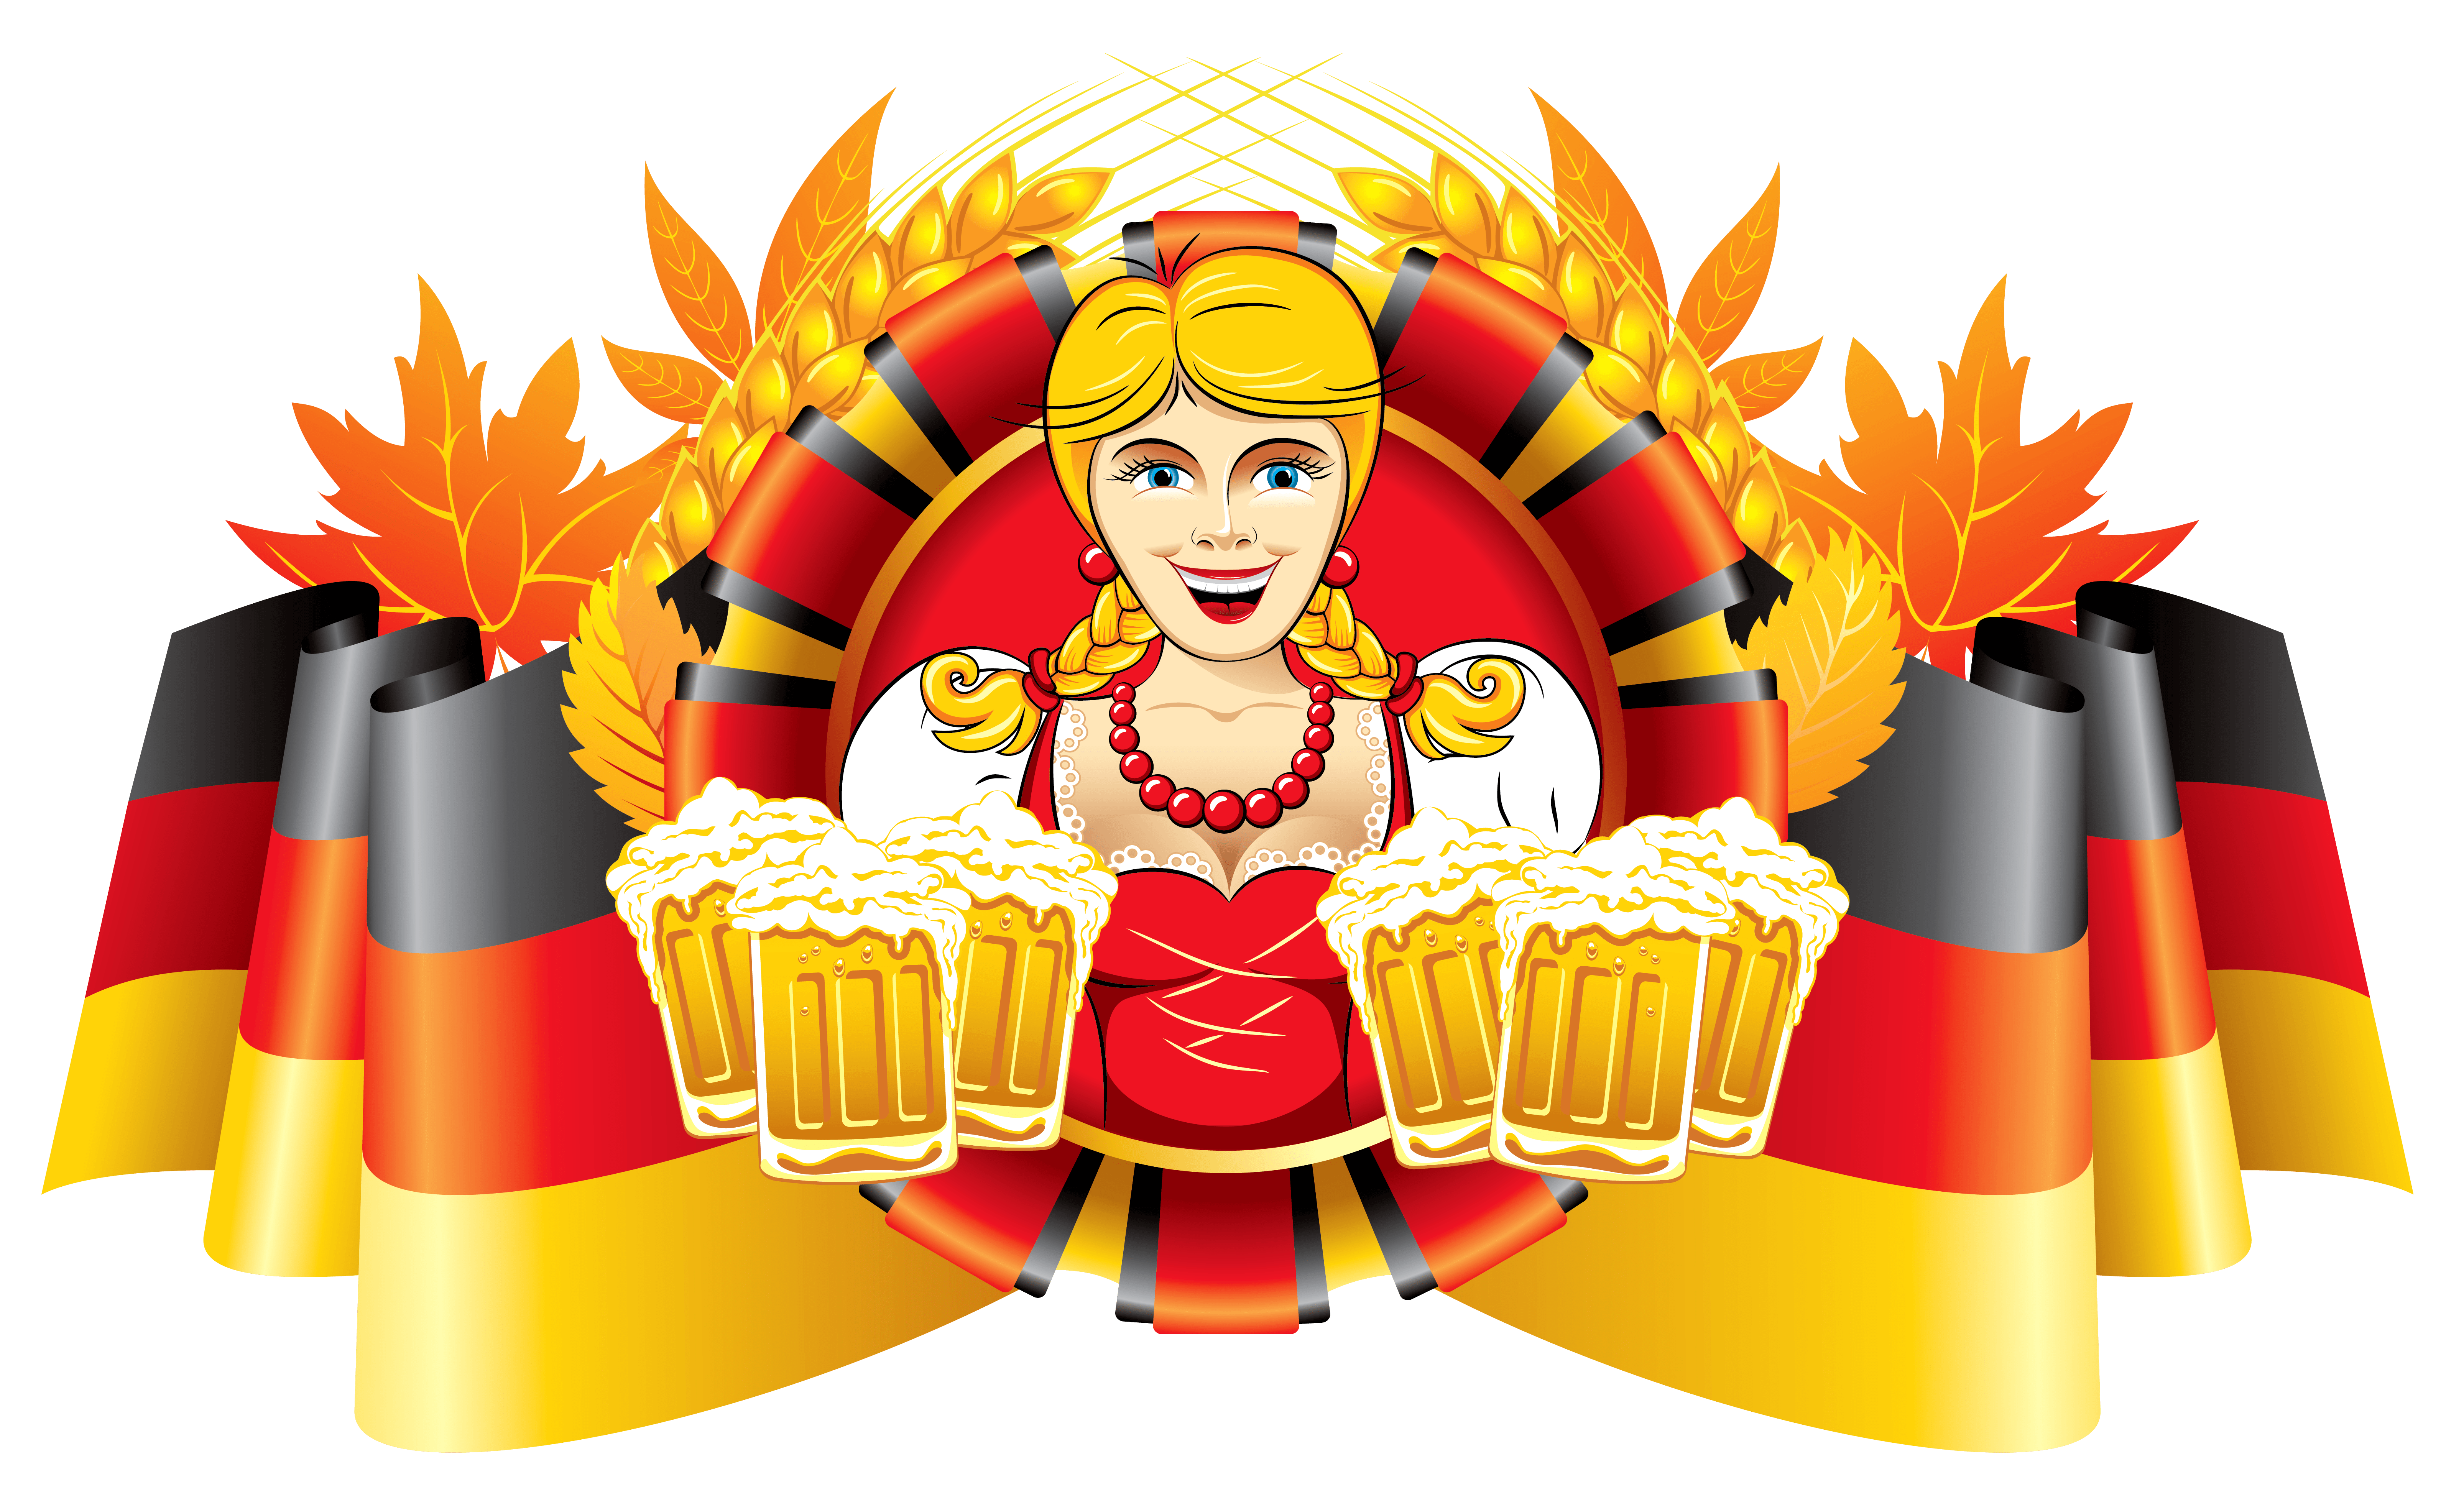 Oktoberfest_Decor_German_Flag_and Girl_with_Beer.png?m=1438198943